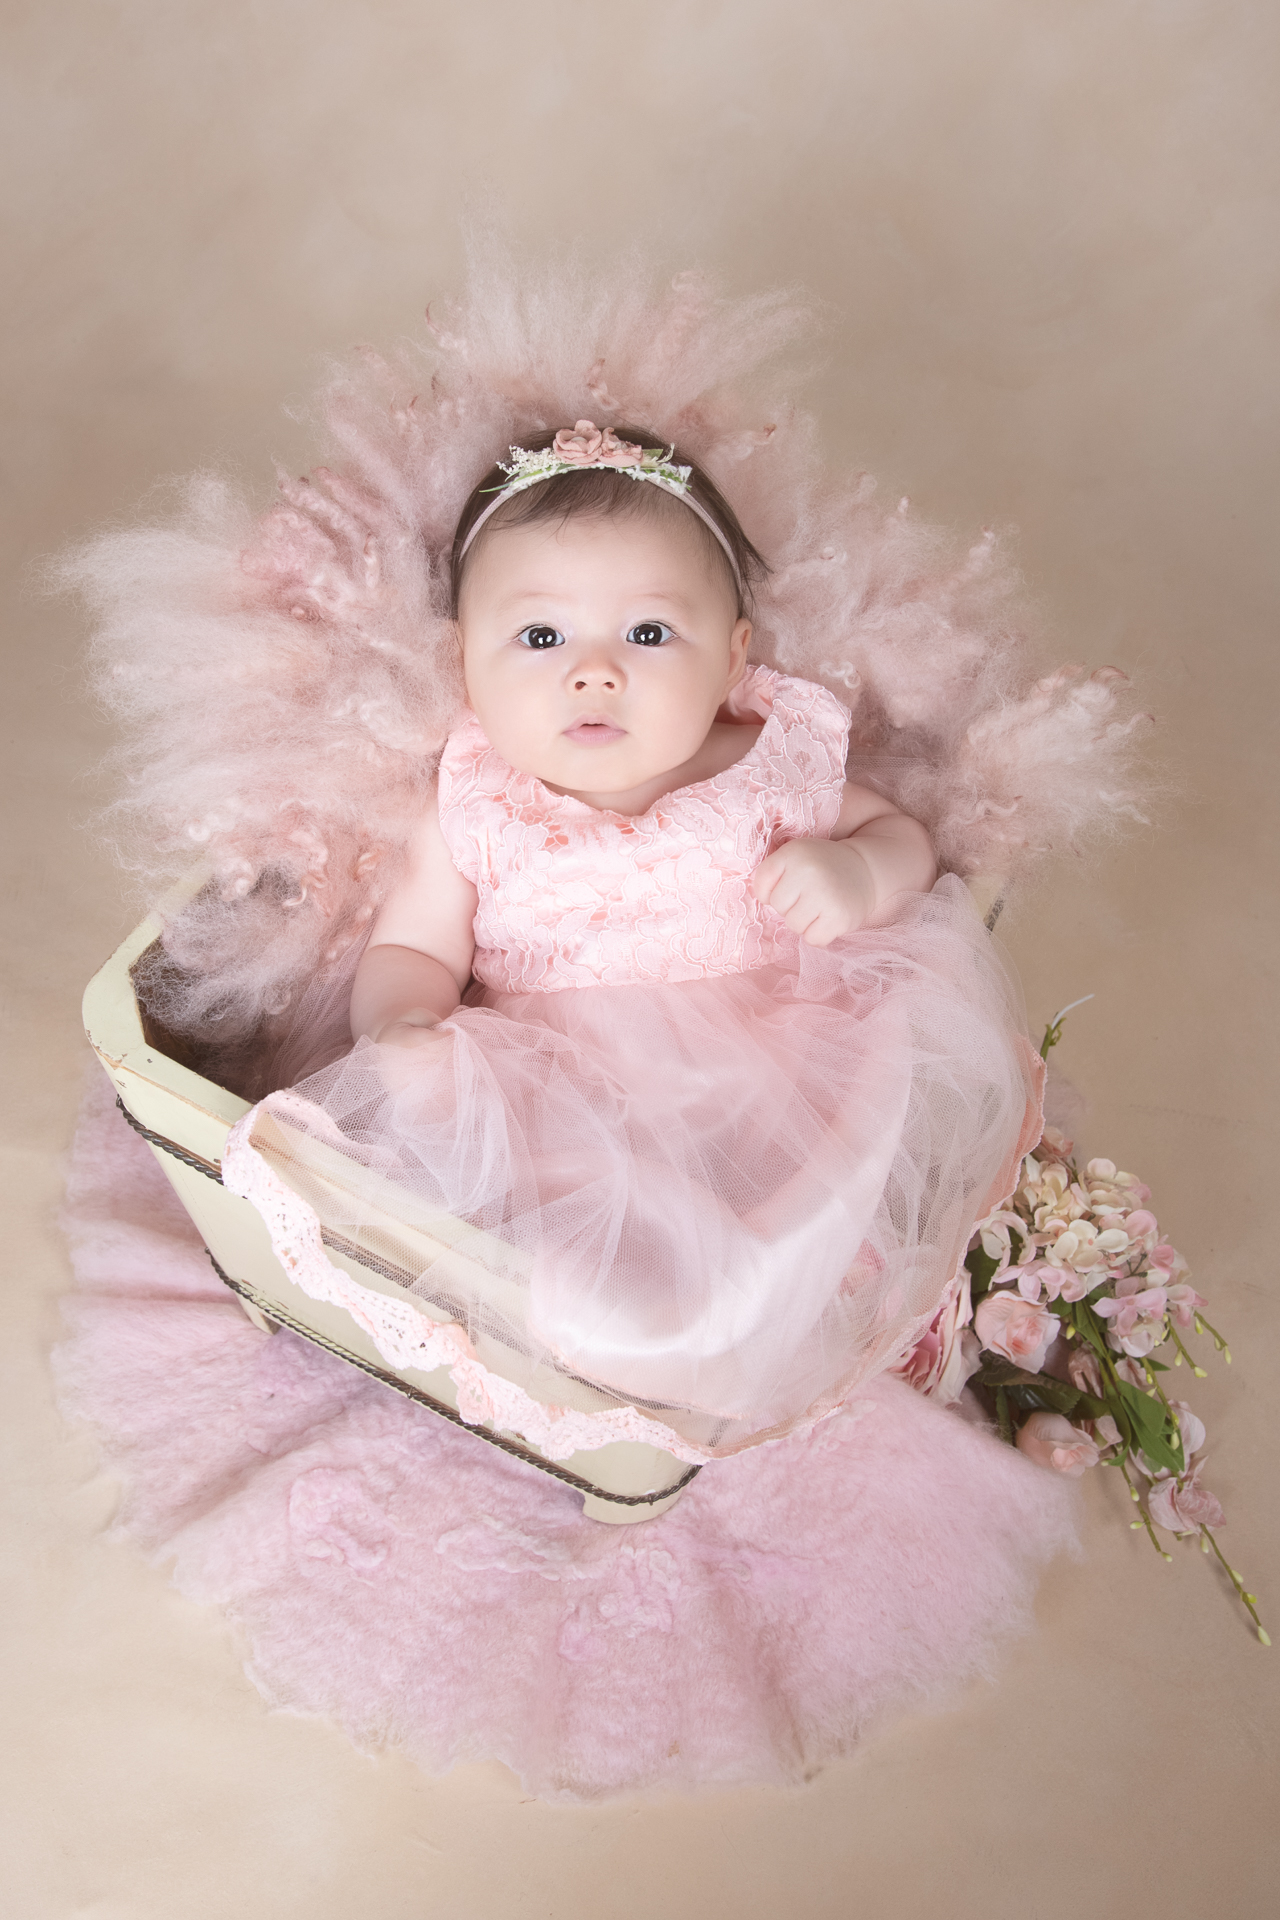 100 days old baby girl wears pink dress and headband. Flowers and fluffy carpet on the floors decorates image. Light brown backdrop.